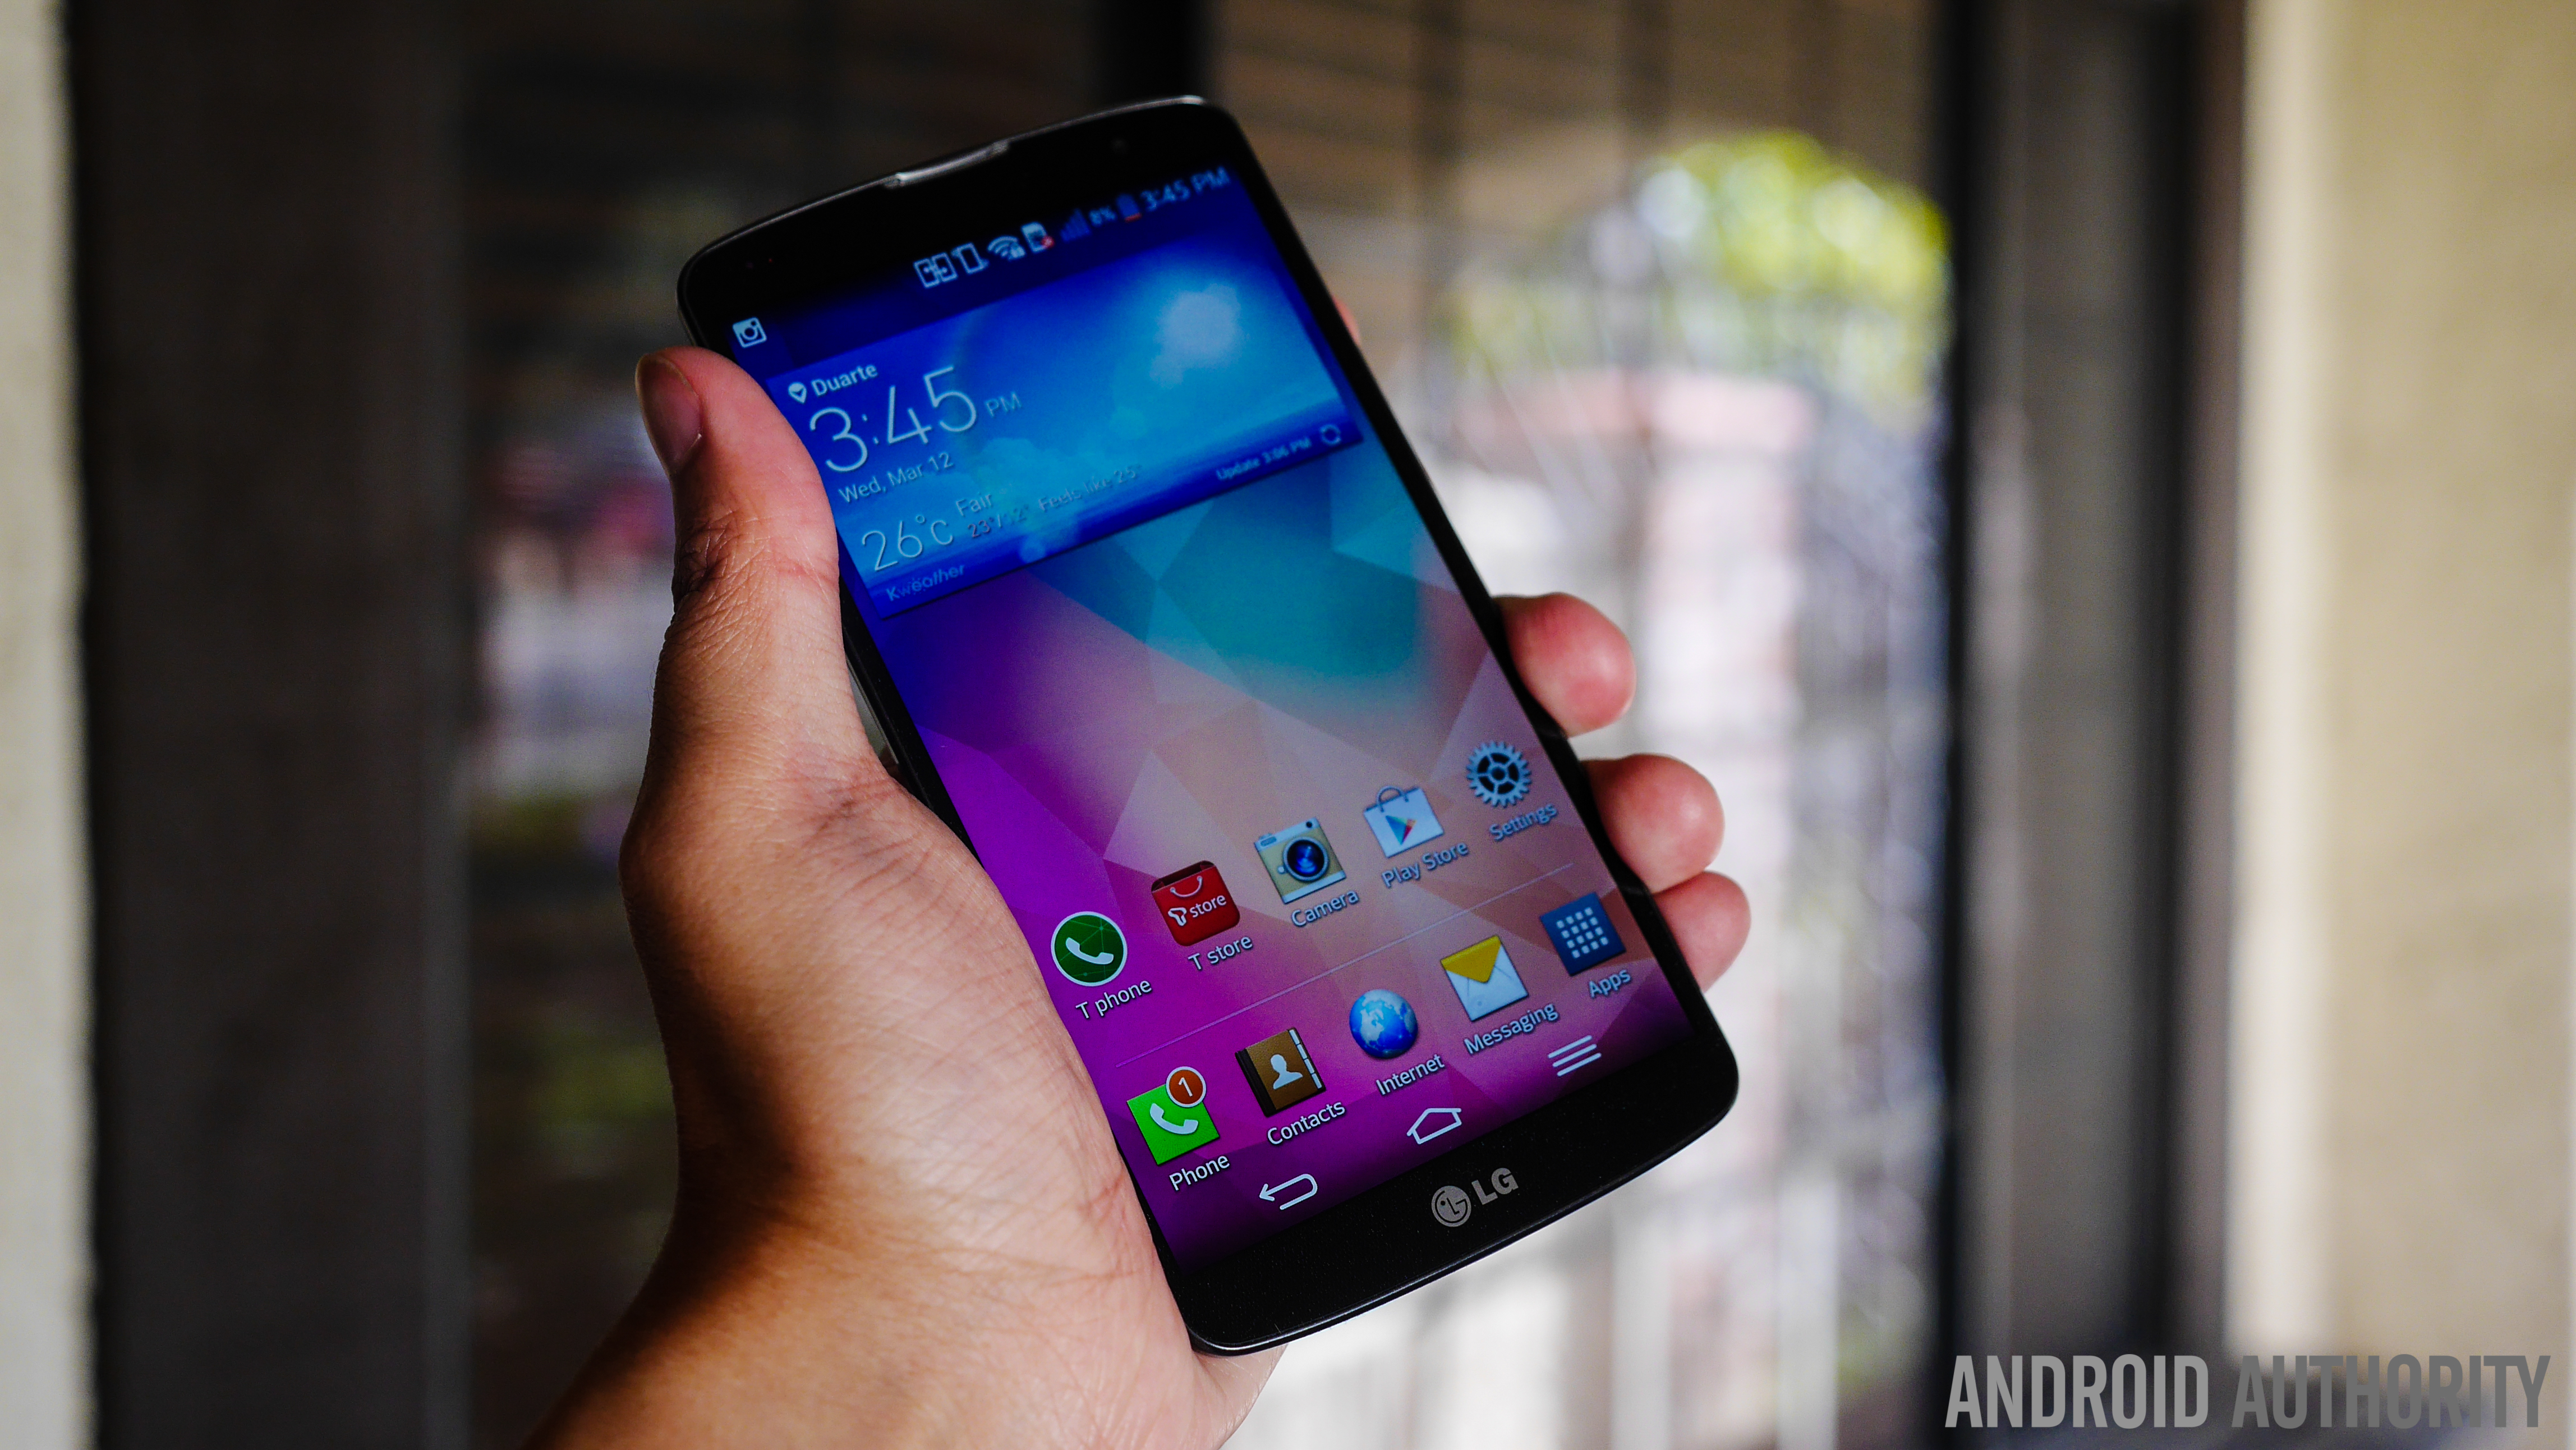 Will LG end the G Pro line in favor of simplifying its product line? 